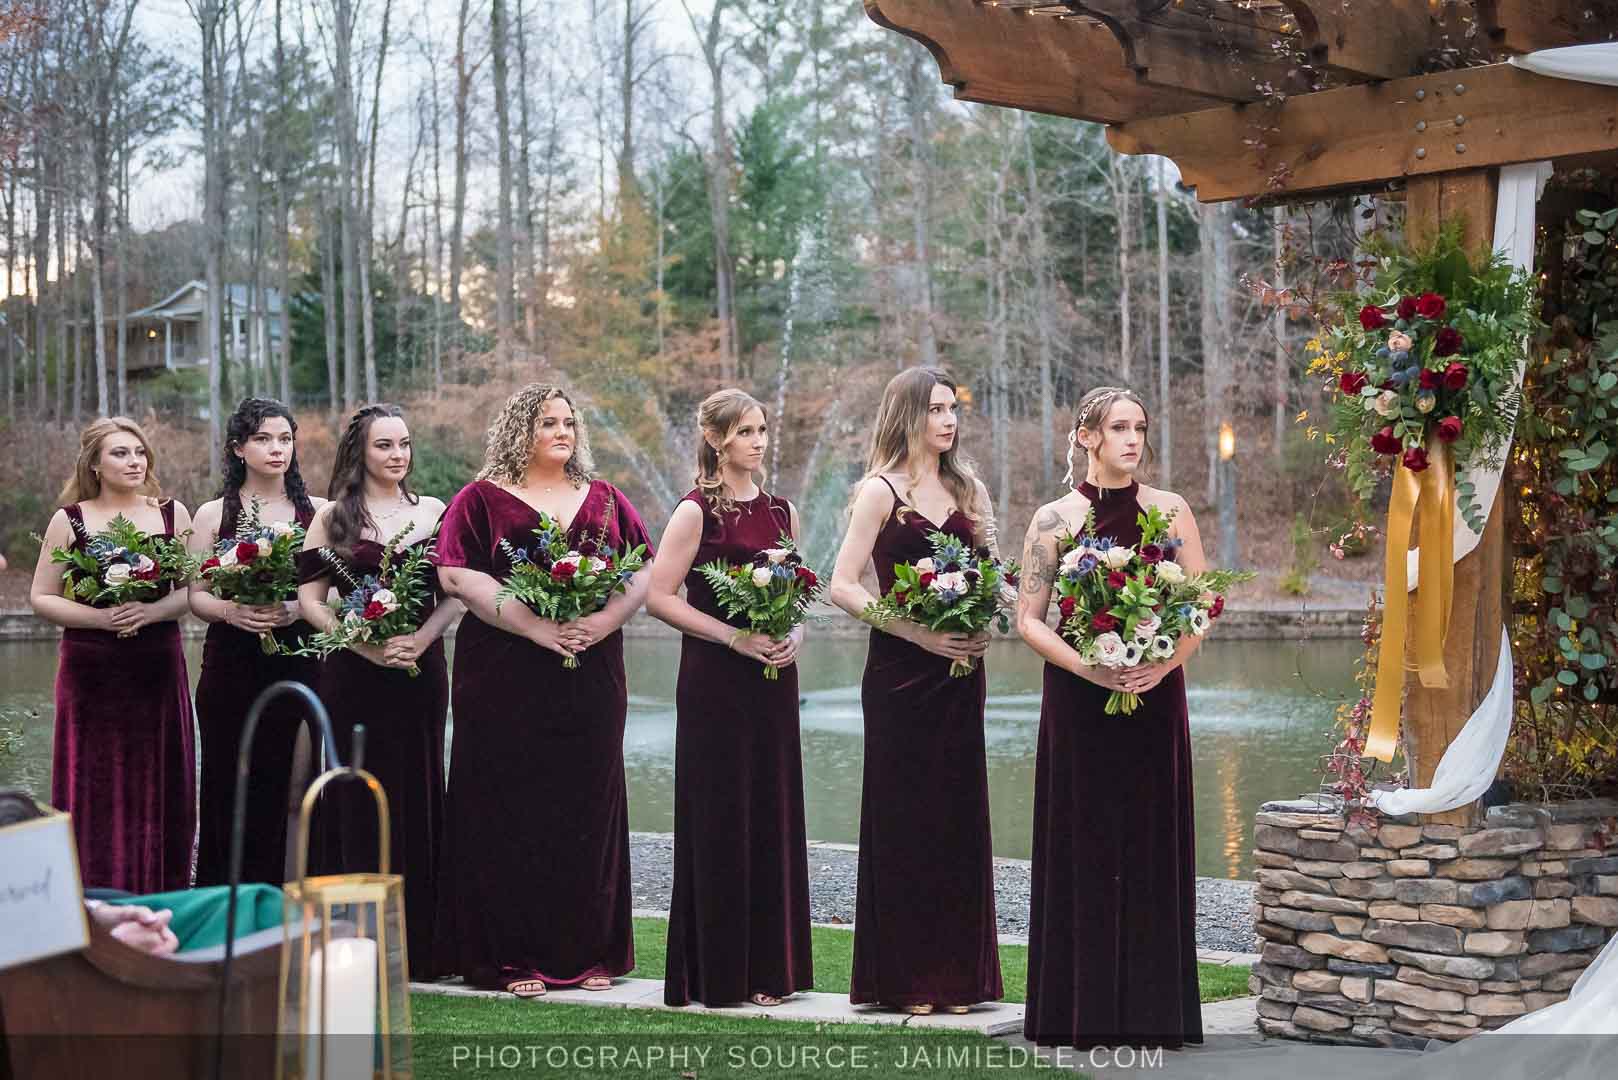 Rocky's Lake Estate Wedding Venue - Wedding ceremony - bridesmaids standing and watching the ceremony